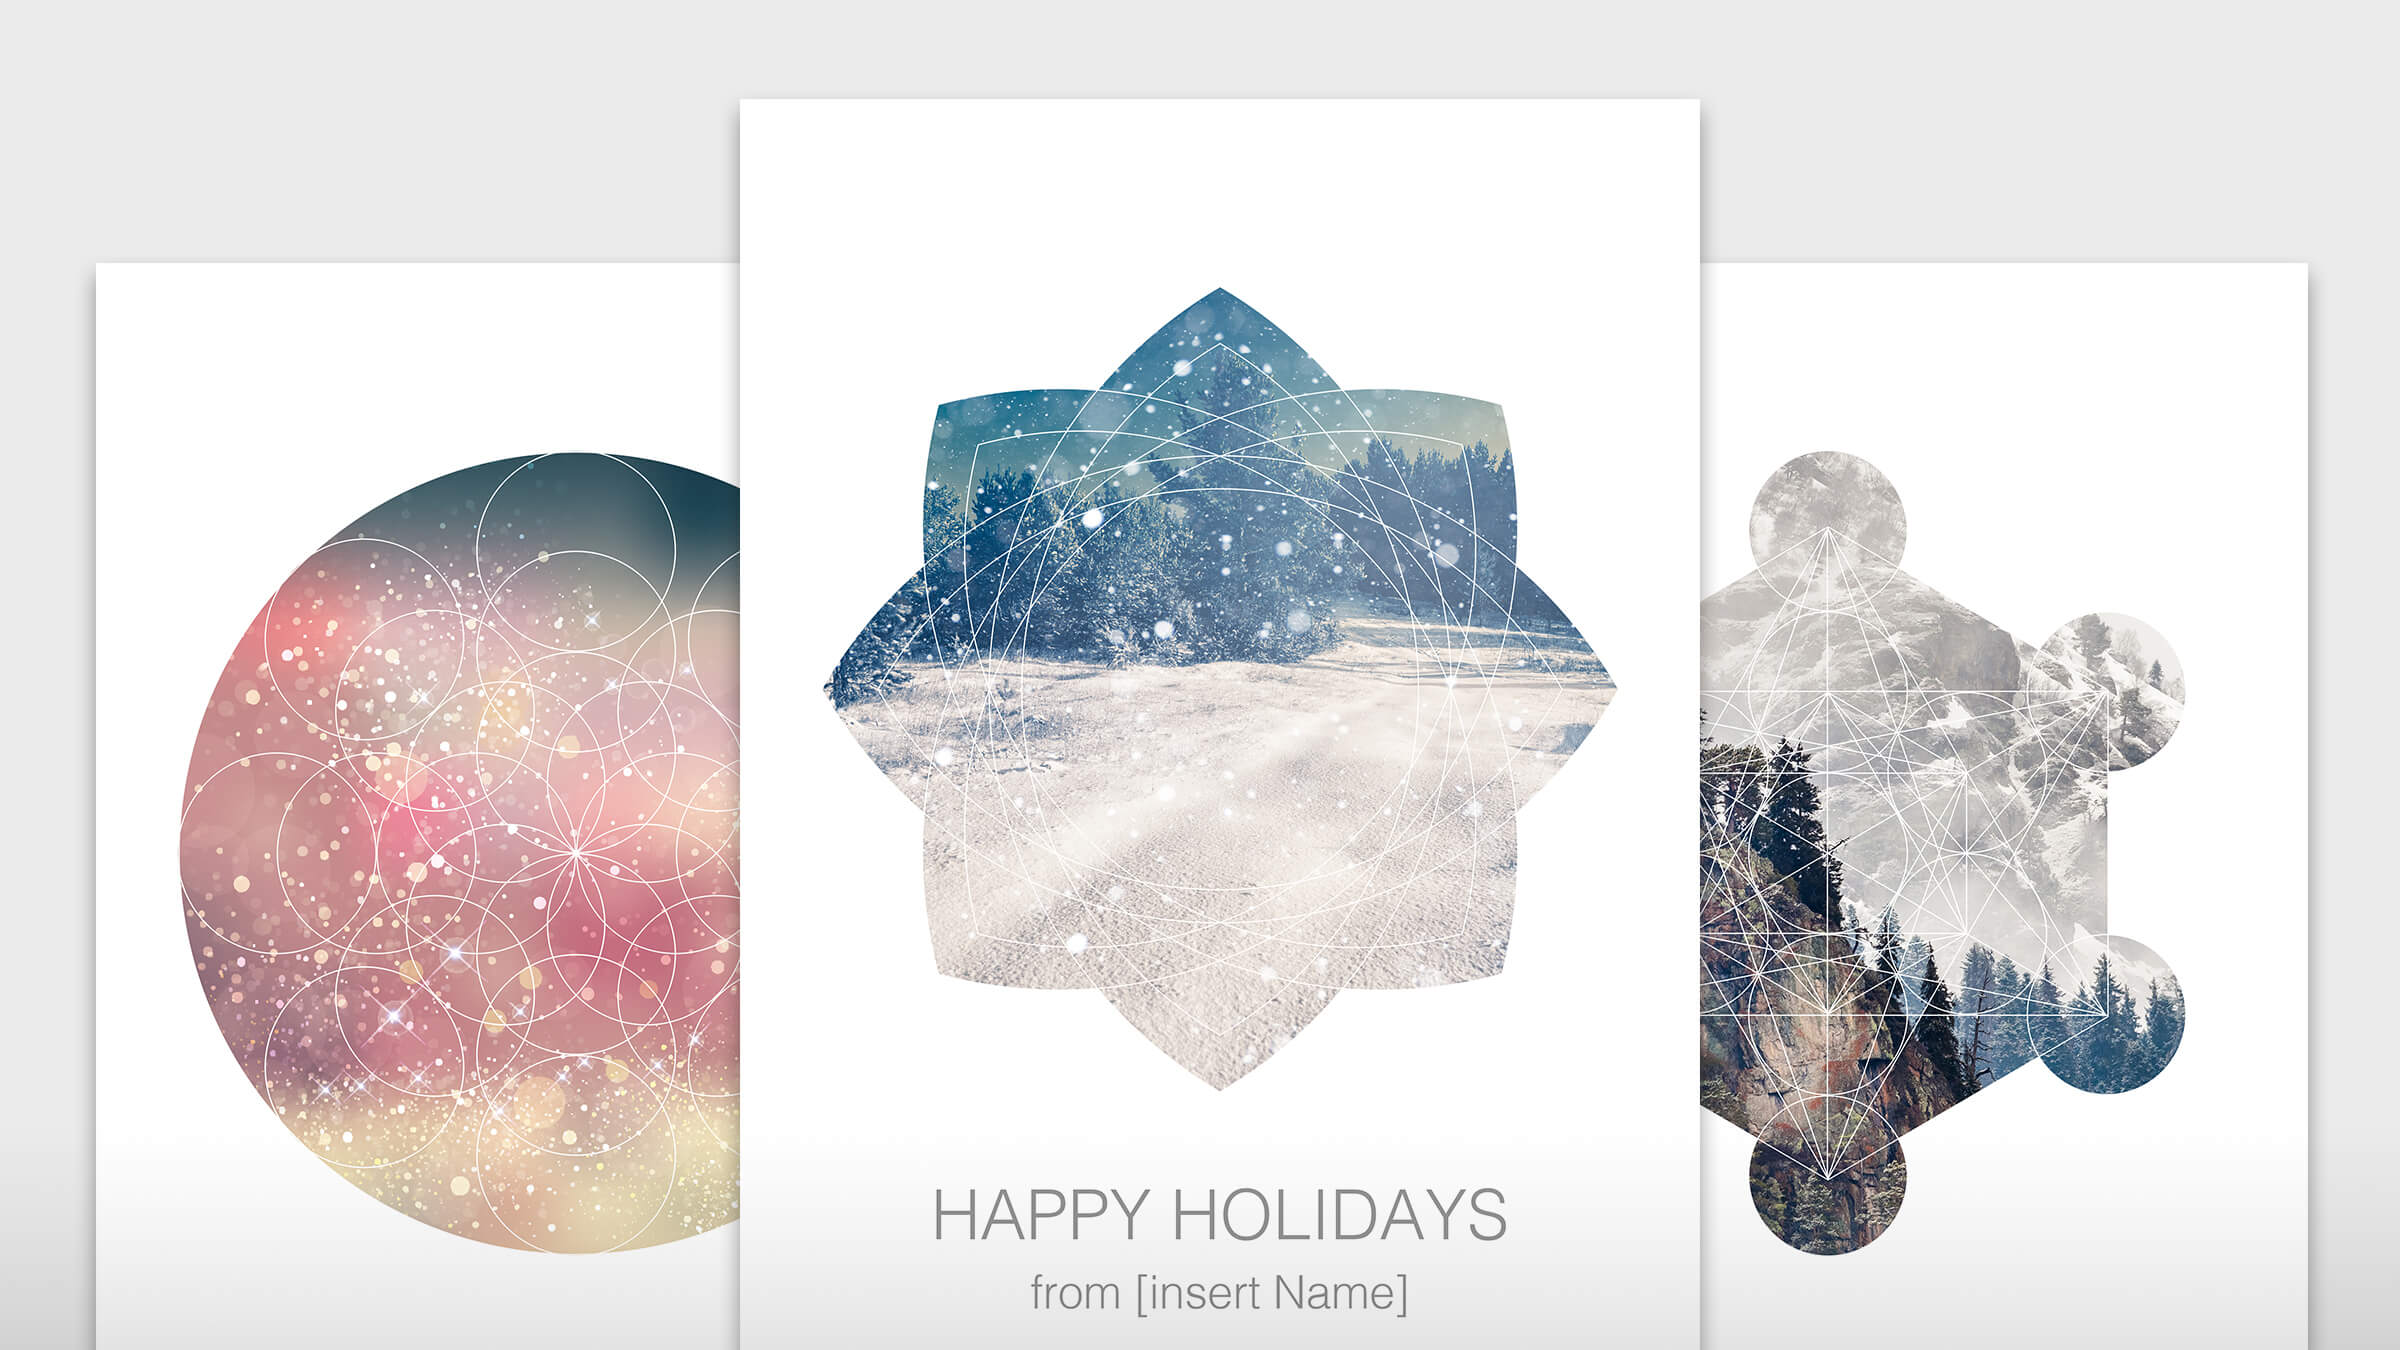 Create A Unique Holiday Card With An Adobe Stock Template Inside Adobe Illustrator Christmas Card Template